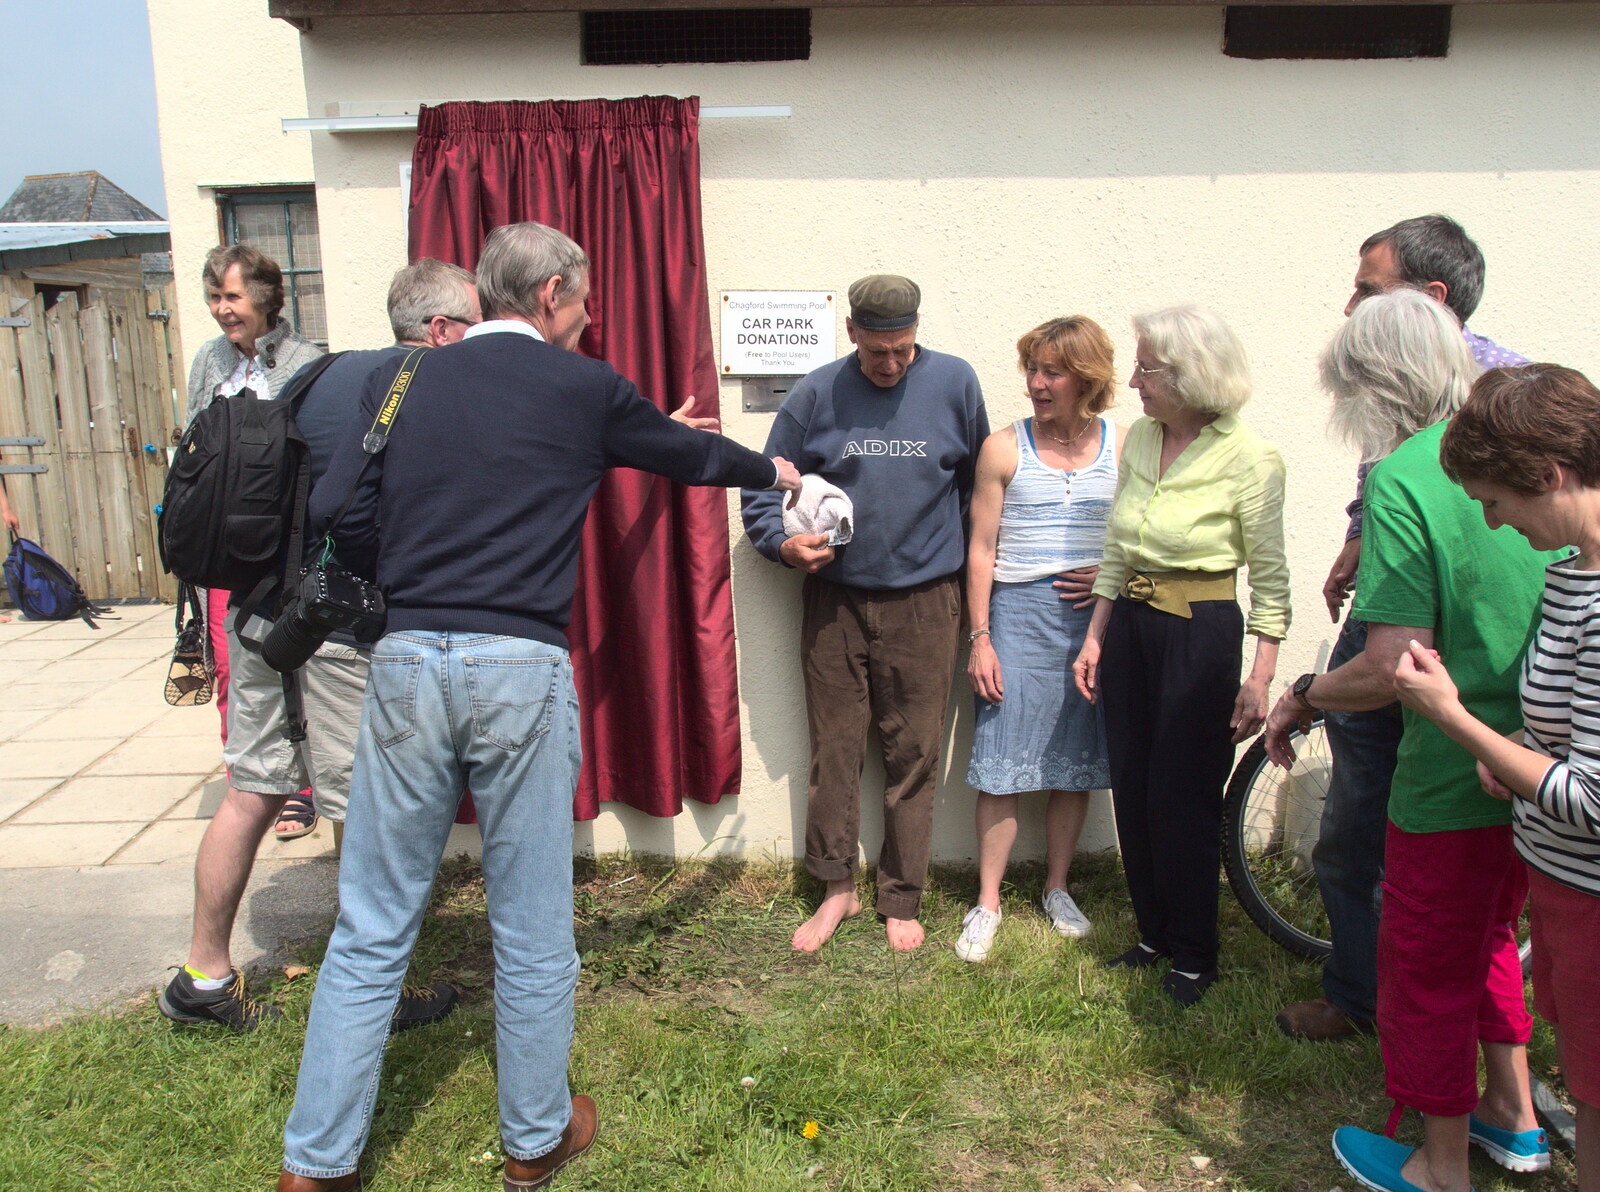 A photo is set up from The Grand Re-opening of the Chagford Lido, Chagford, Devon - 28th May 2016